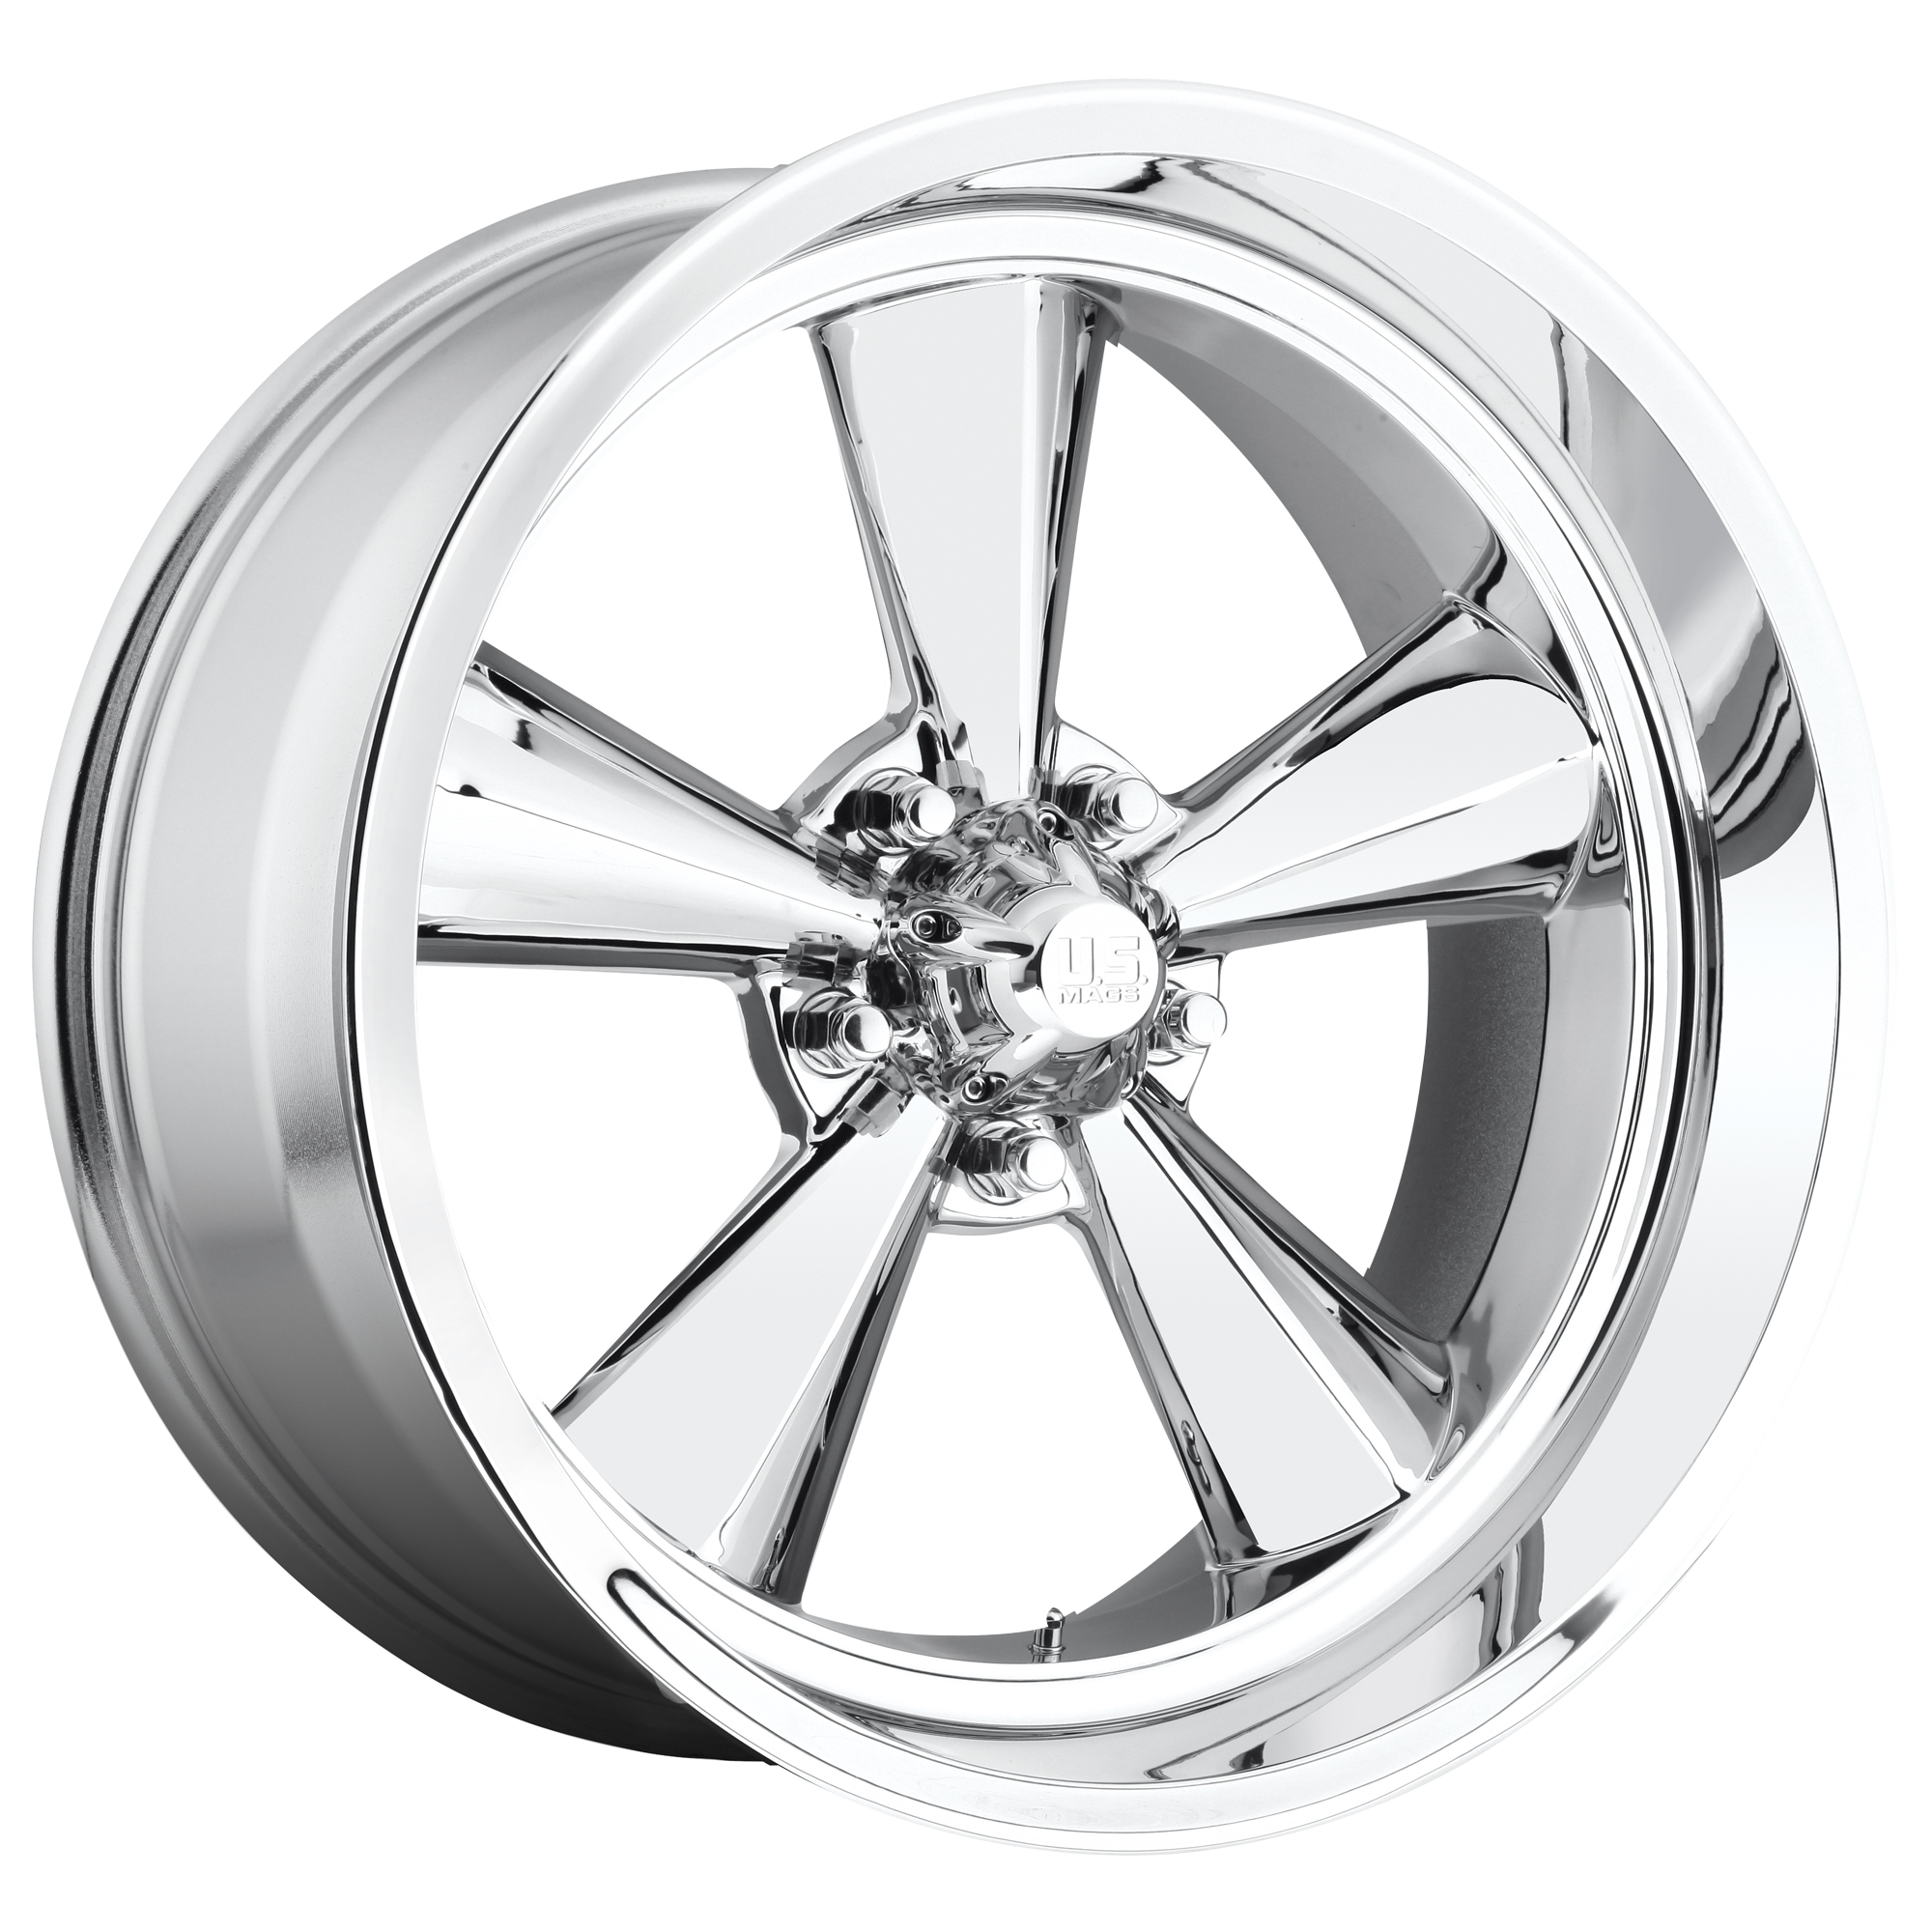 STANDARD 15x8 5x114.30 CHROME PLATED (0 mm) - Tires and Engine Performance